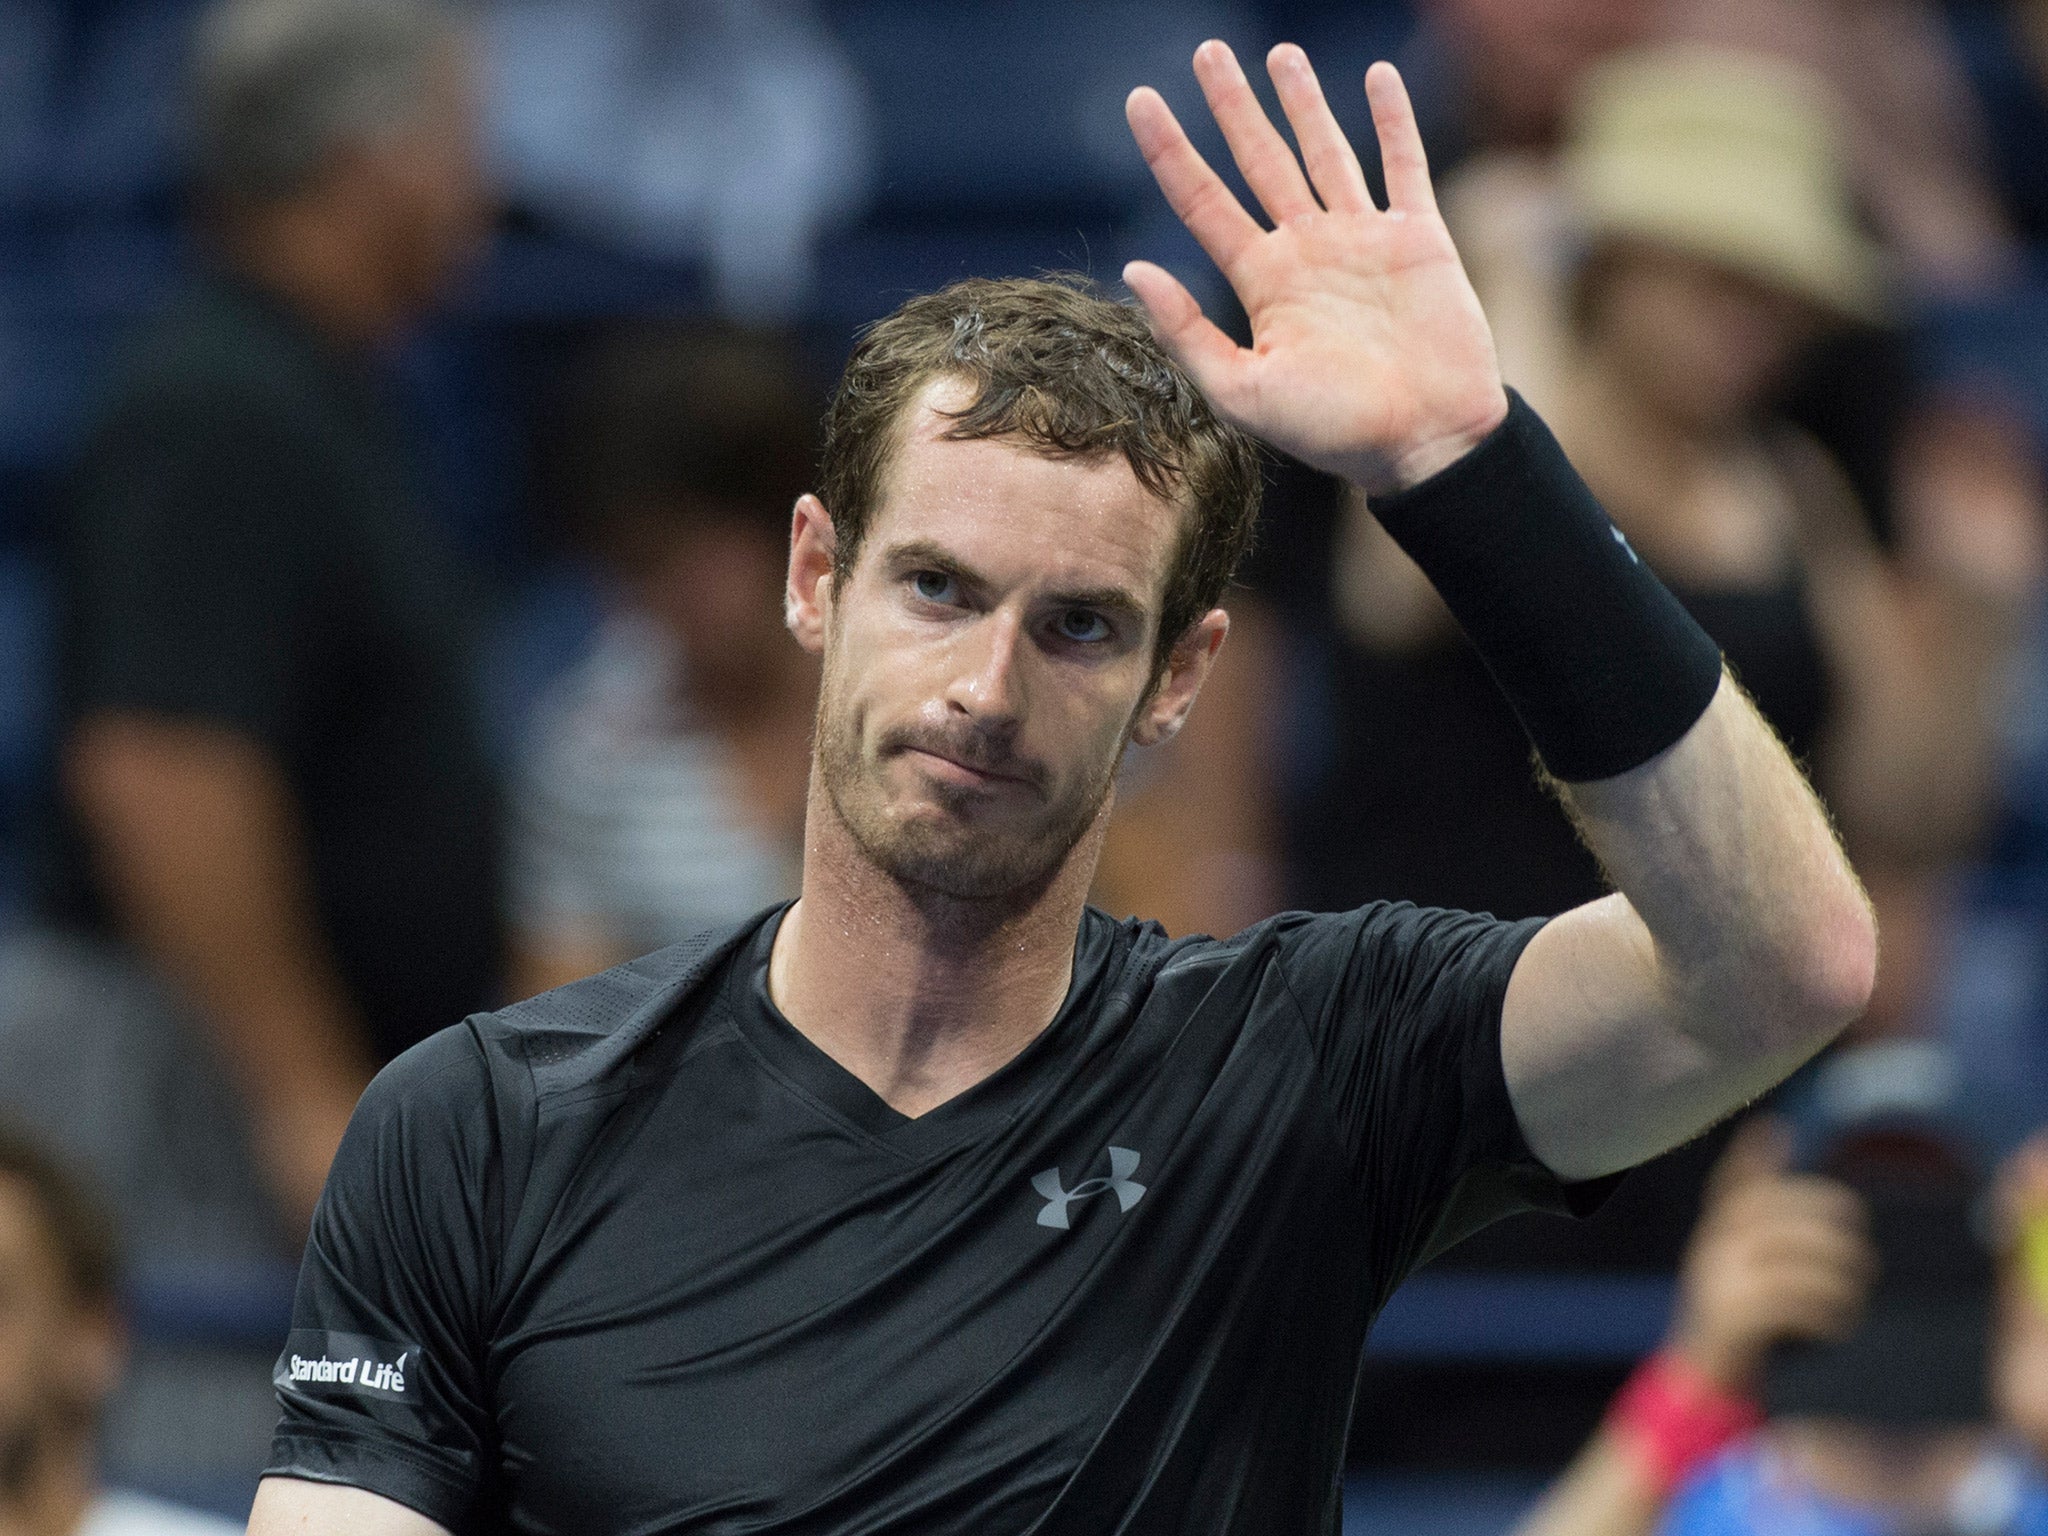 Andy Murray beat Lukas Rosol to reach the second round of the US Open